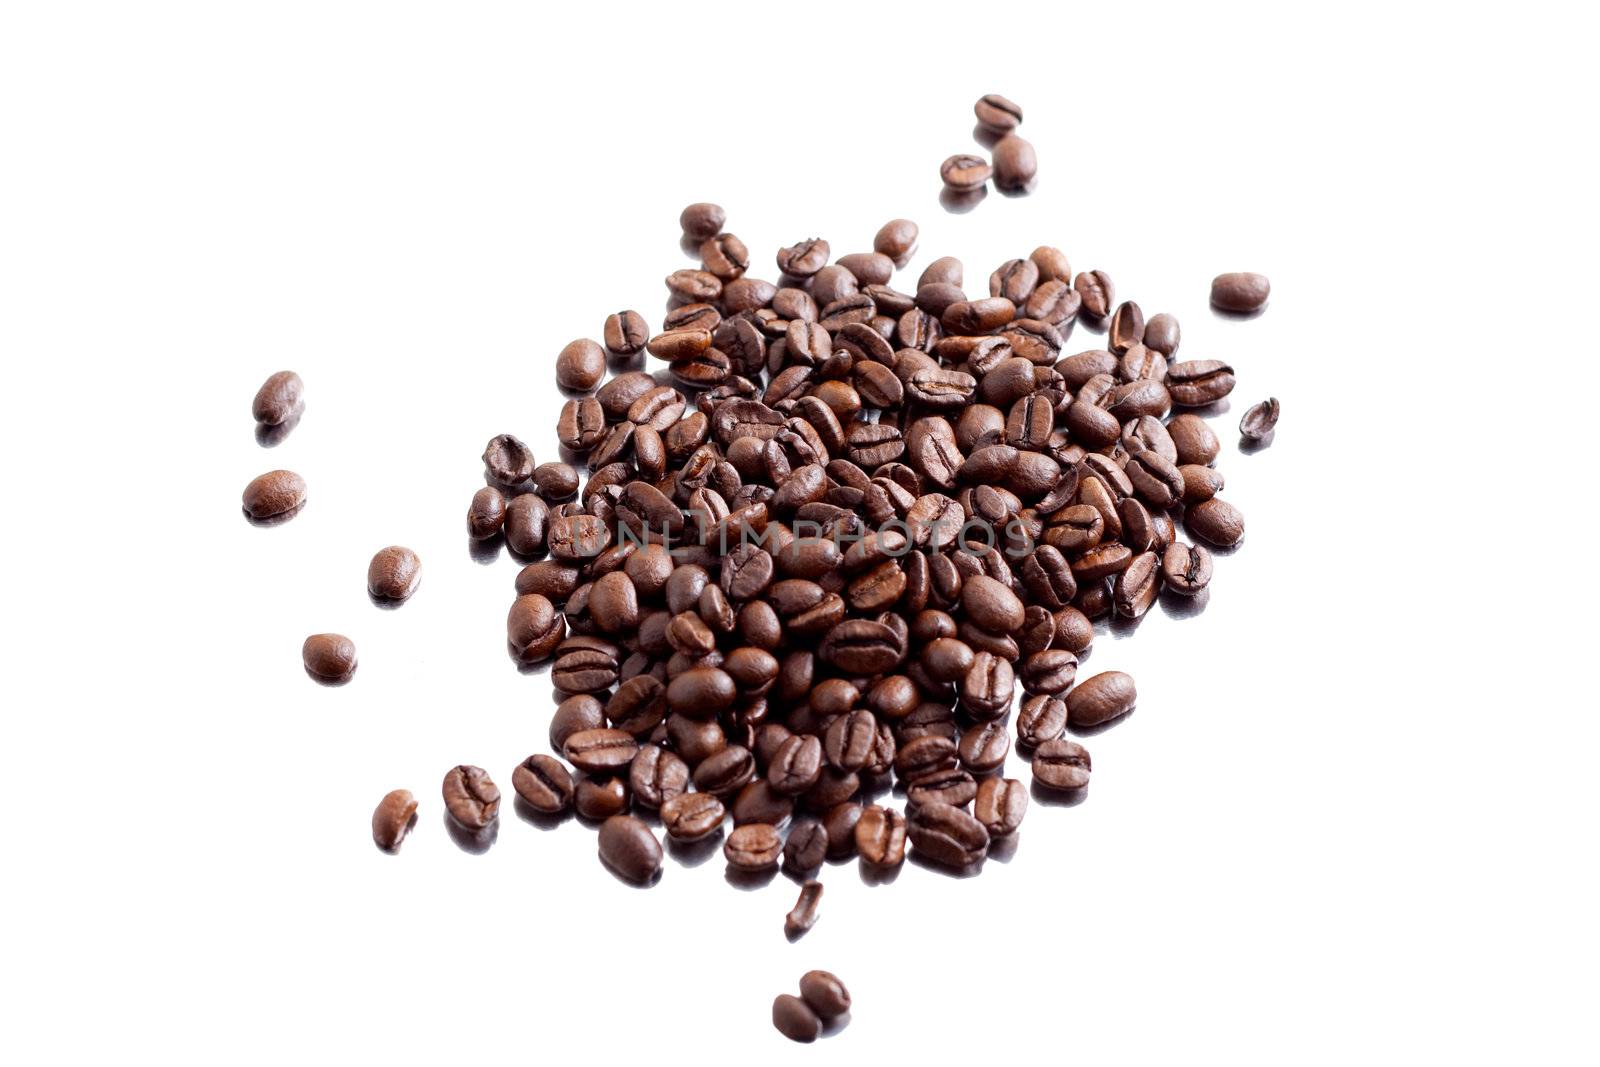 Coffeebeans by azschach